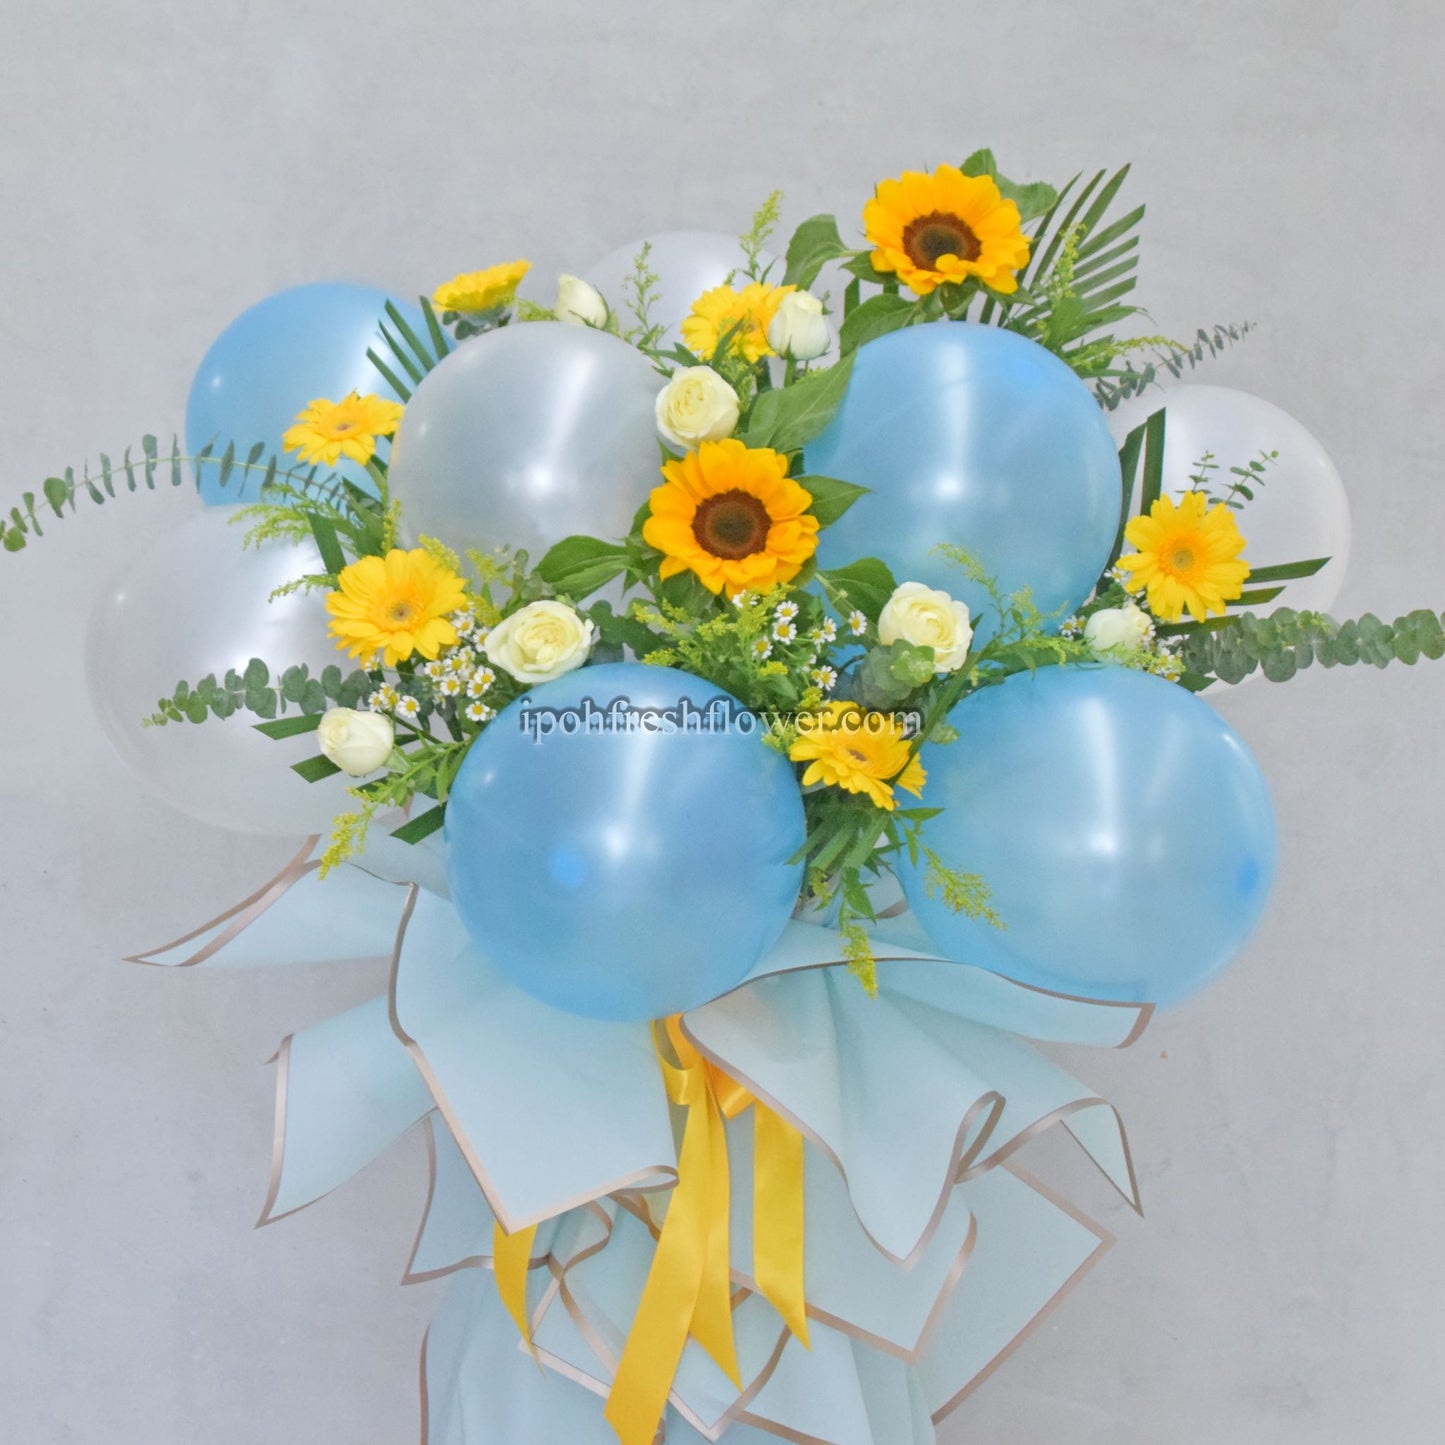 Mason| Grand opening flower stand with balloon